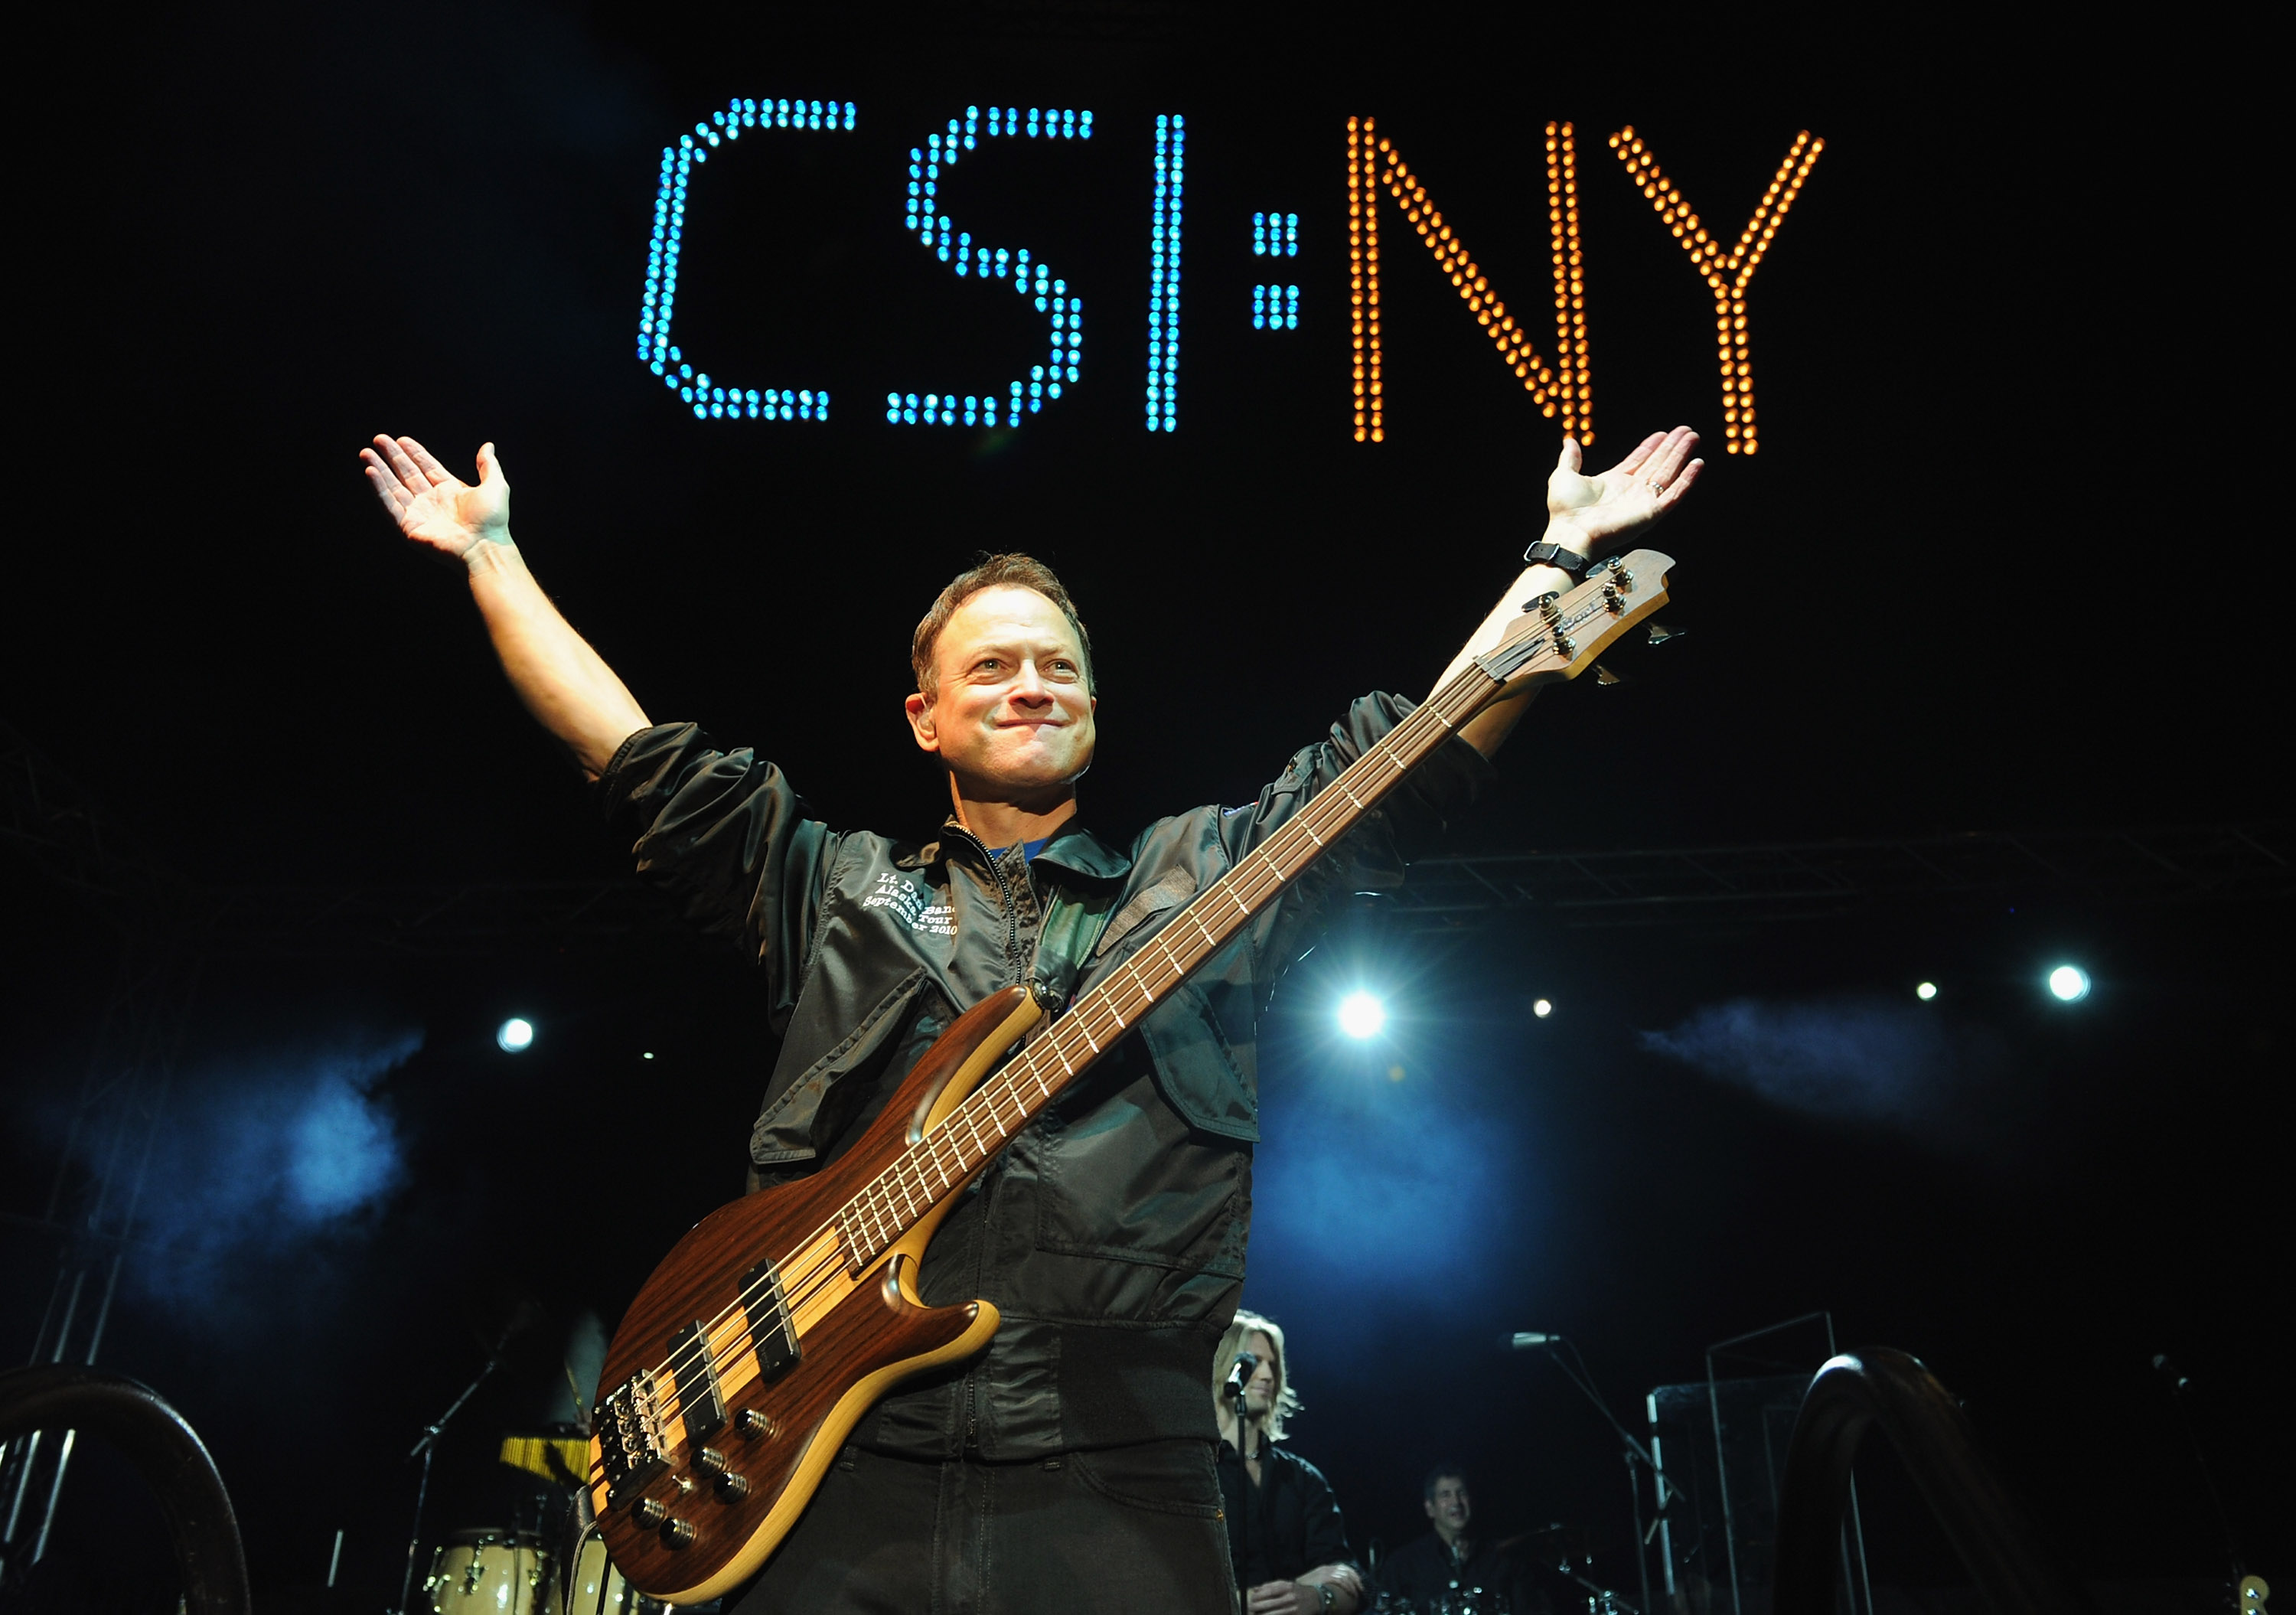 Gary Sinise & the Lt. Dan Band perform at the 6th annual "CSI: NY" mid-season bash in Studio City, California, on October 29, 2010. | Source: Getty Images